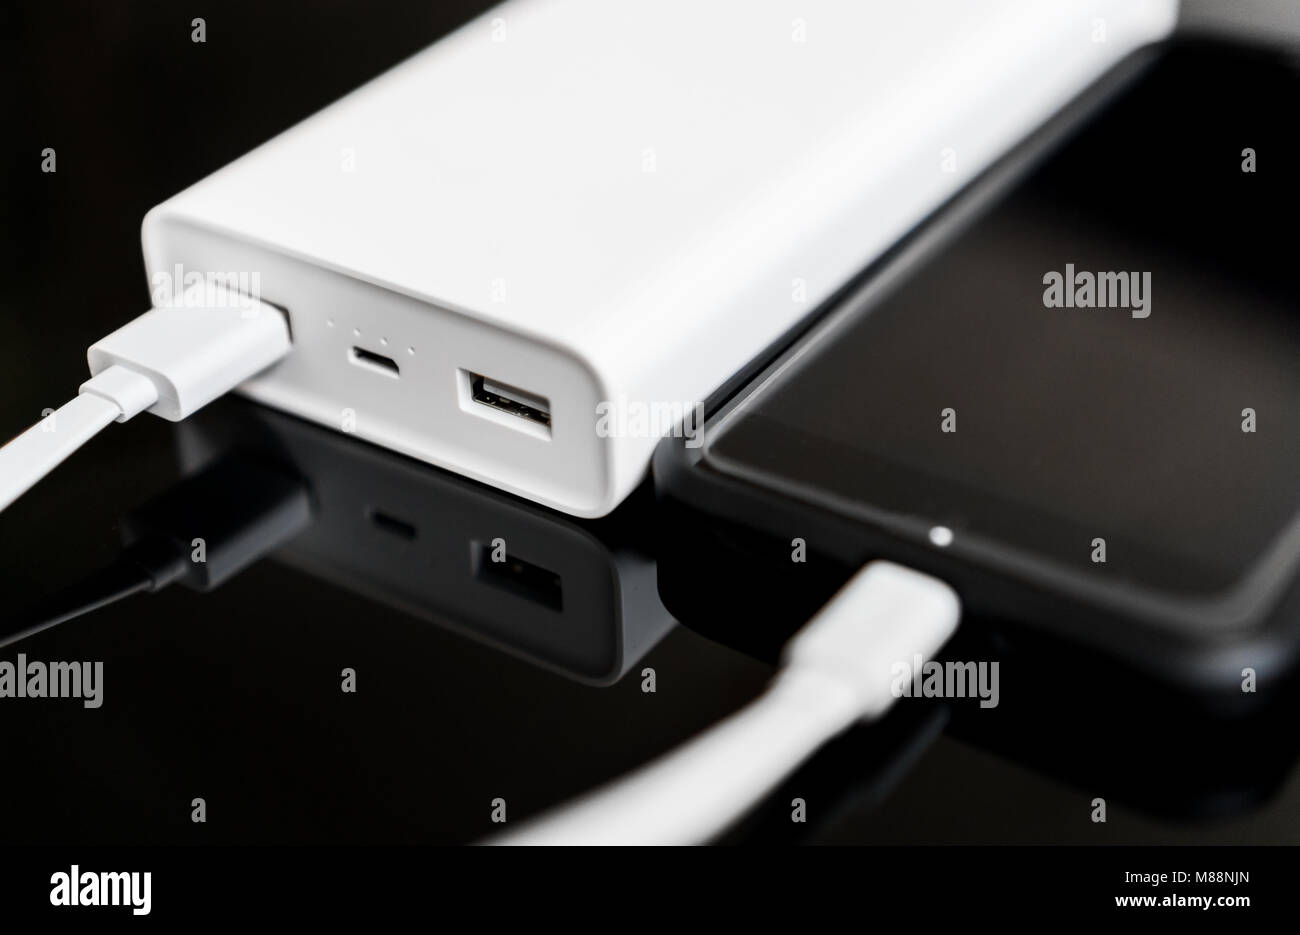 White power bank with smartphone on mirrored surface. Stock Photo